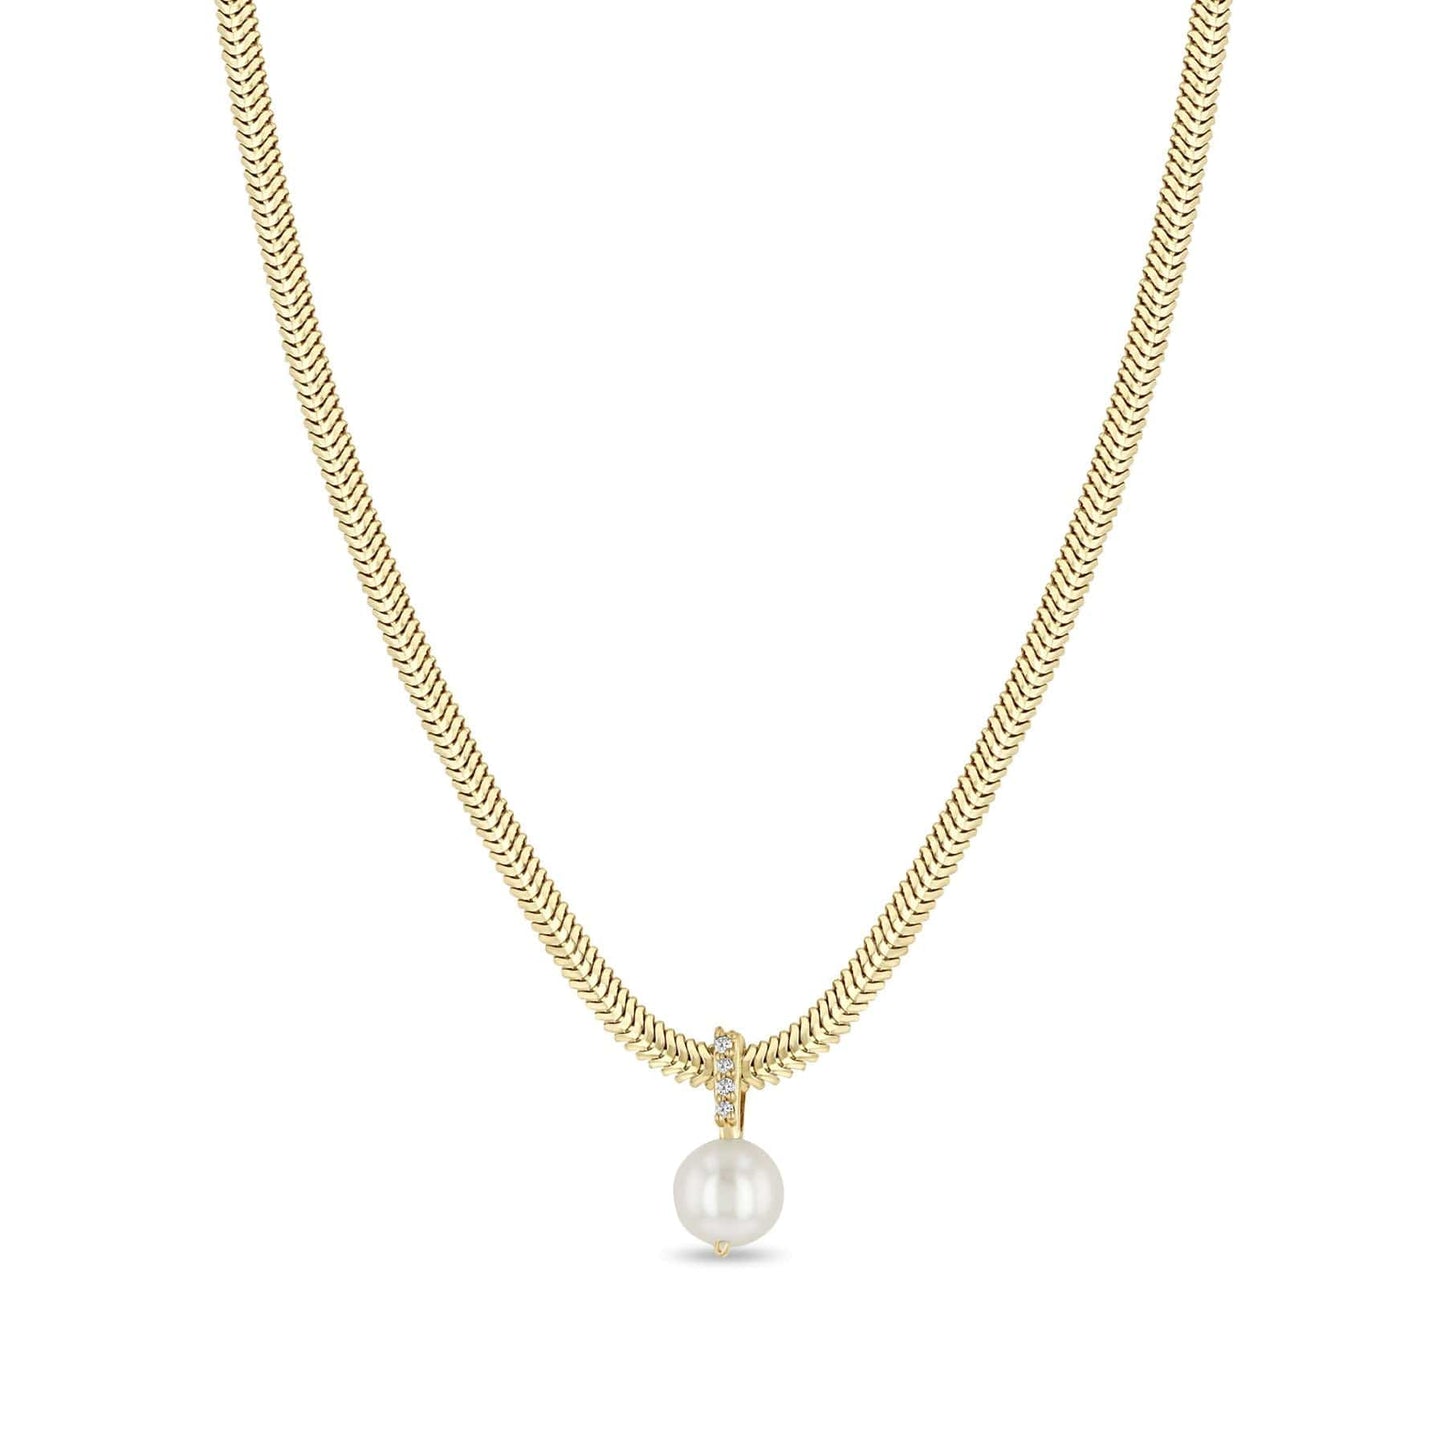 NKL-14K Cultured Pearl Hanging from A White Diamond Pavé Bail Necklace